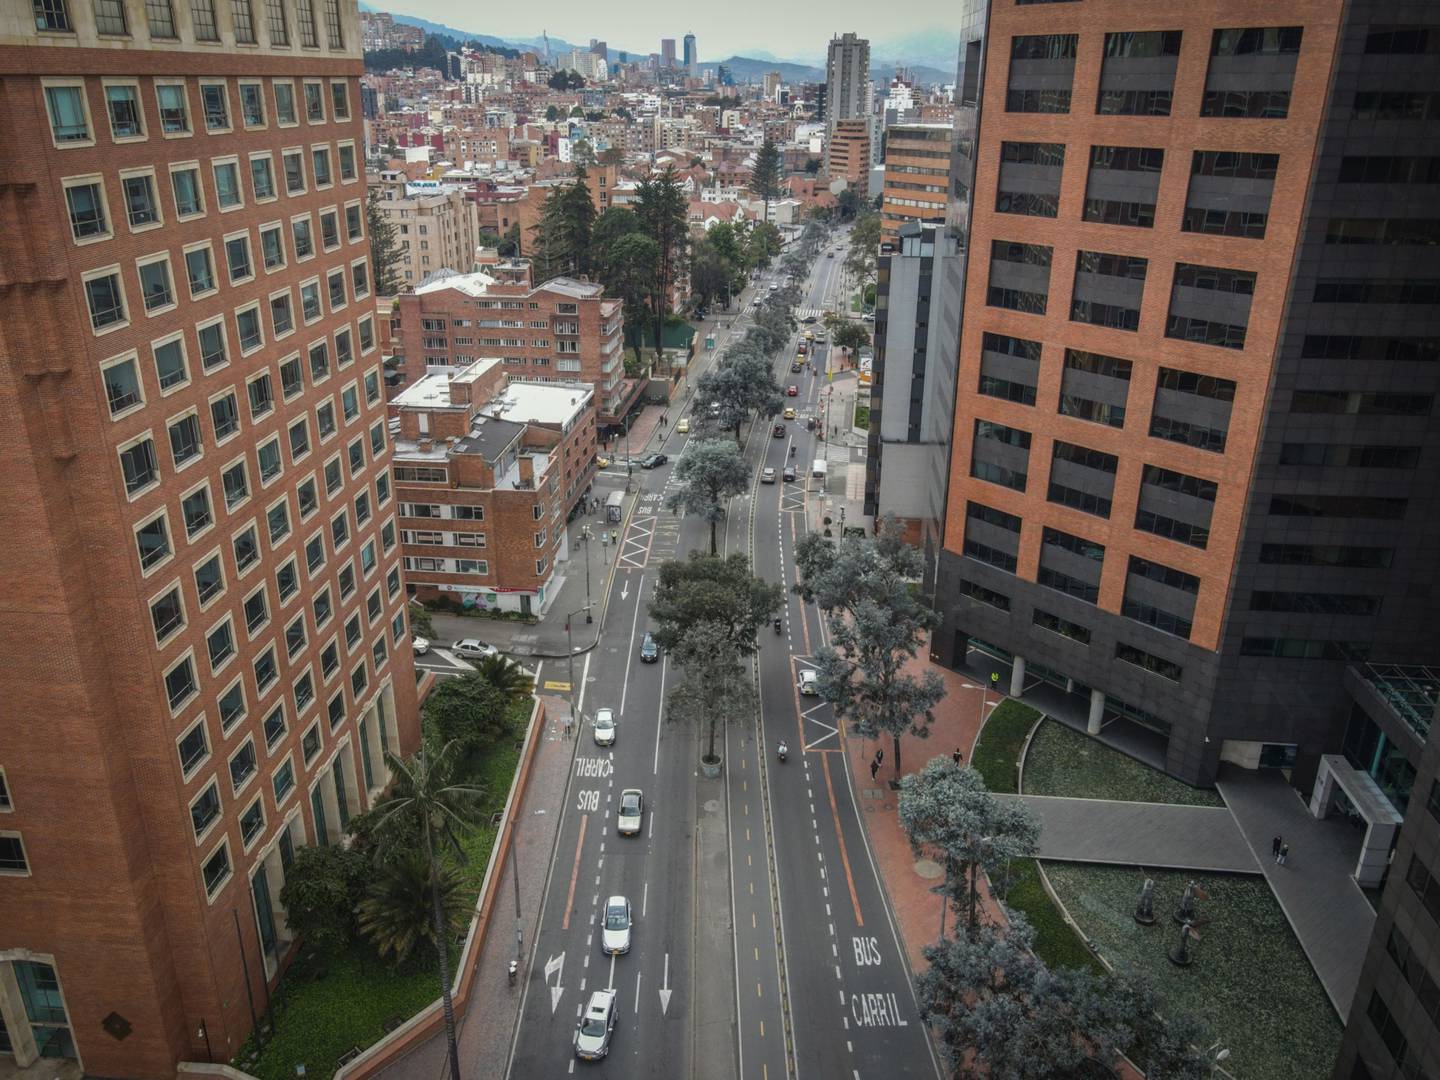 Vehicles on Carrera Septima in Bogota, Colombia, on Saturday, April 9, 2022. Colombia's bustling capital has an ambitious climate plan aiming for a 15% reduction in greenhouse gas emissions by 2024, a 50% reduction by 2030 and carbon neutrality by 2050. Photographer: Nathalia Angarita/Bloomberg